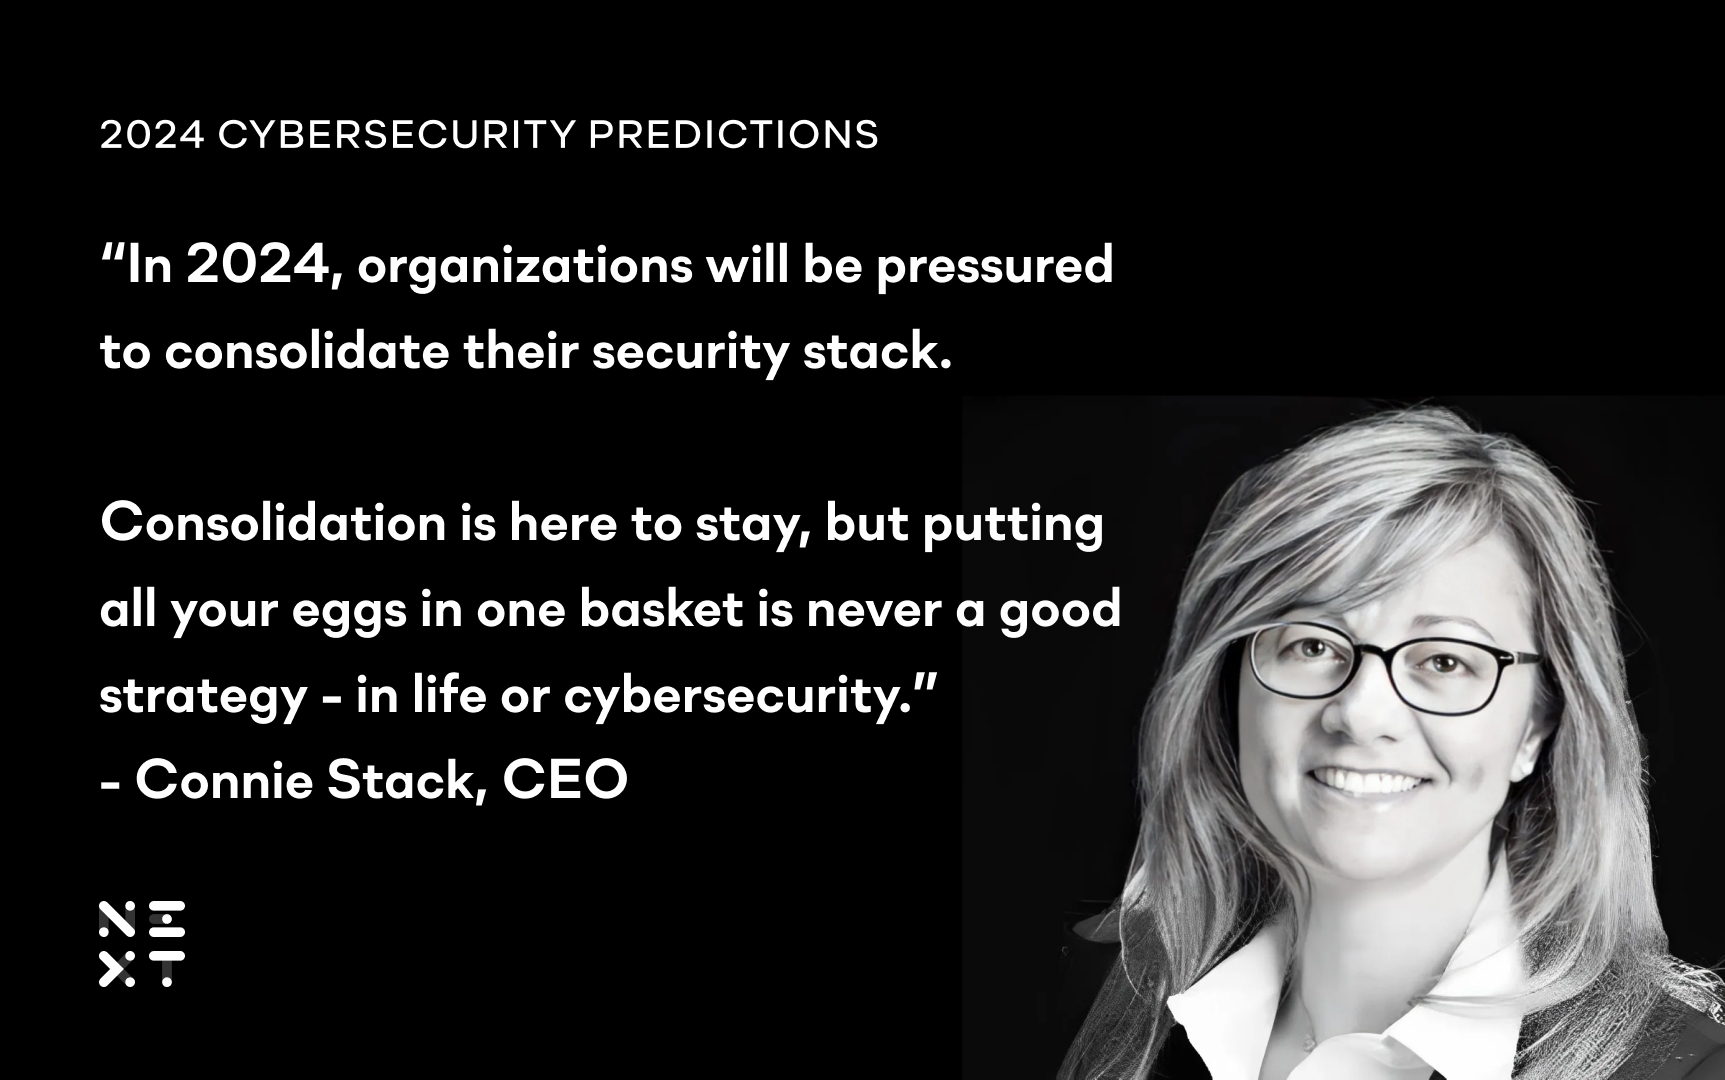 Connie Stack predicts in 2024, security leaders will be pressured to consolidate their software